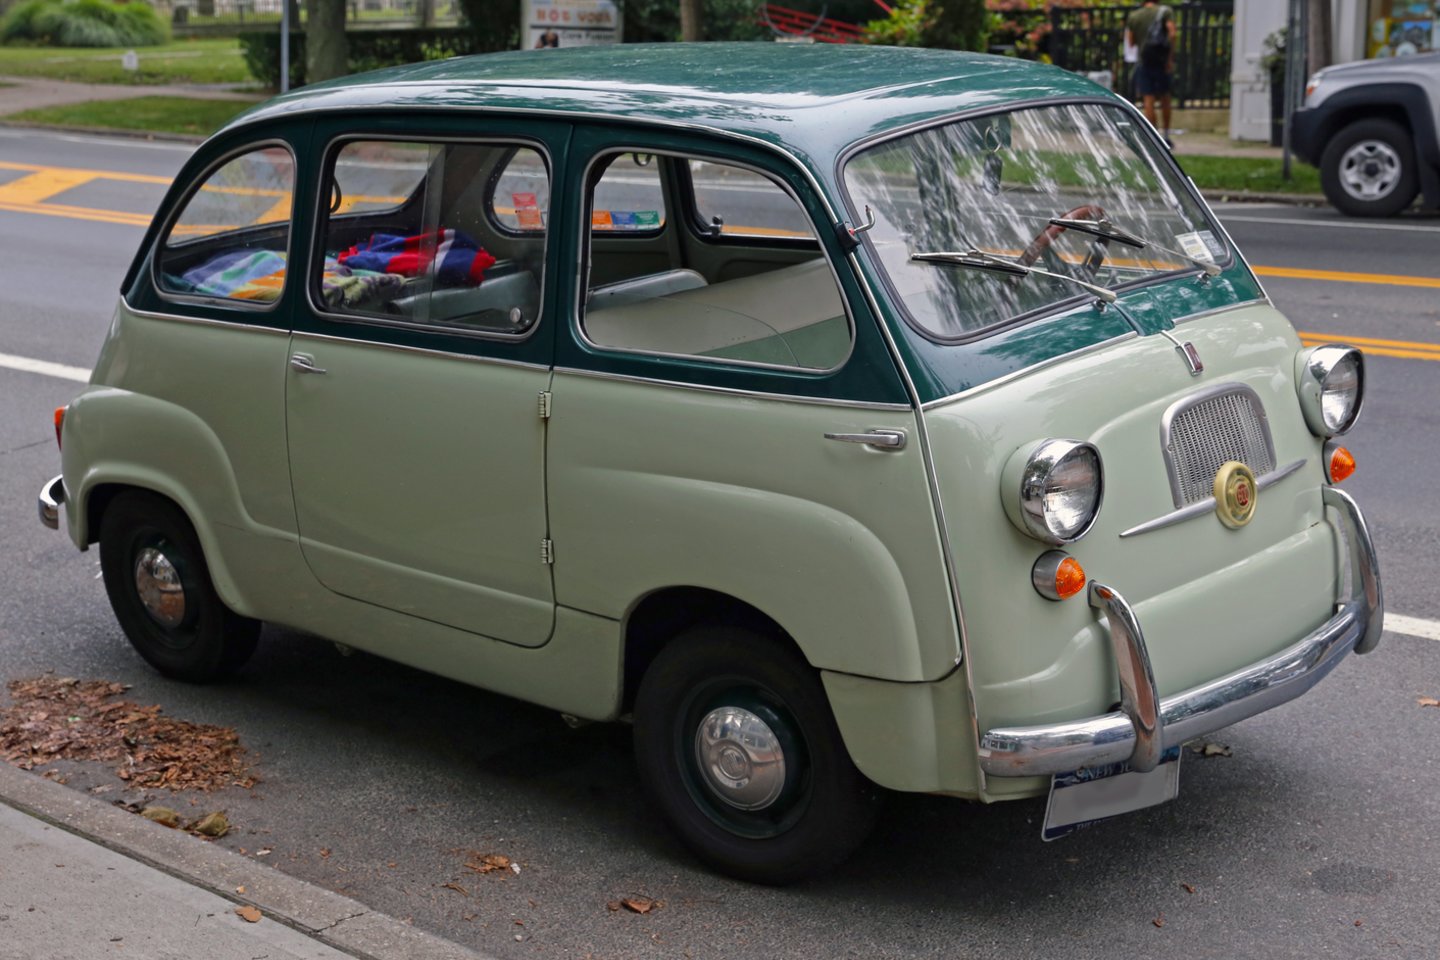  „Fiat 600 Multipla“.<br> Brian Snelson/Mr.choppers/Wikipedia nuotr.